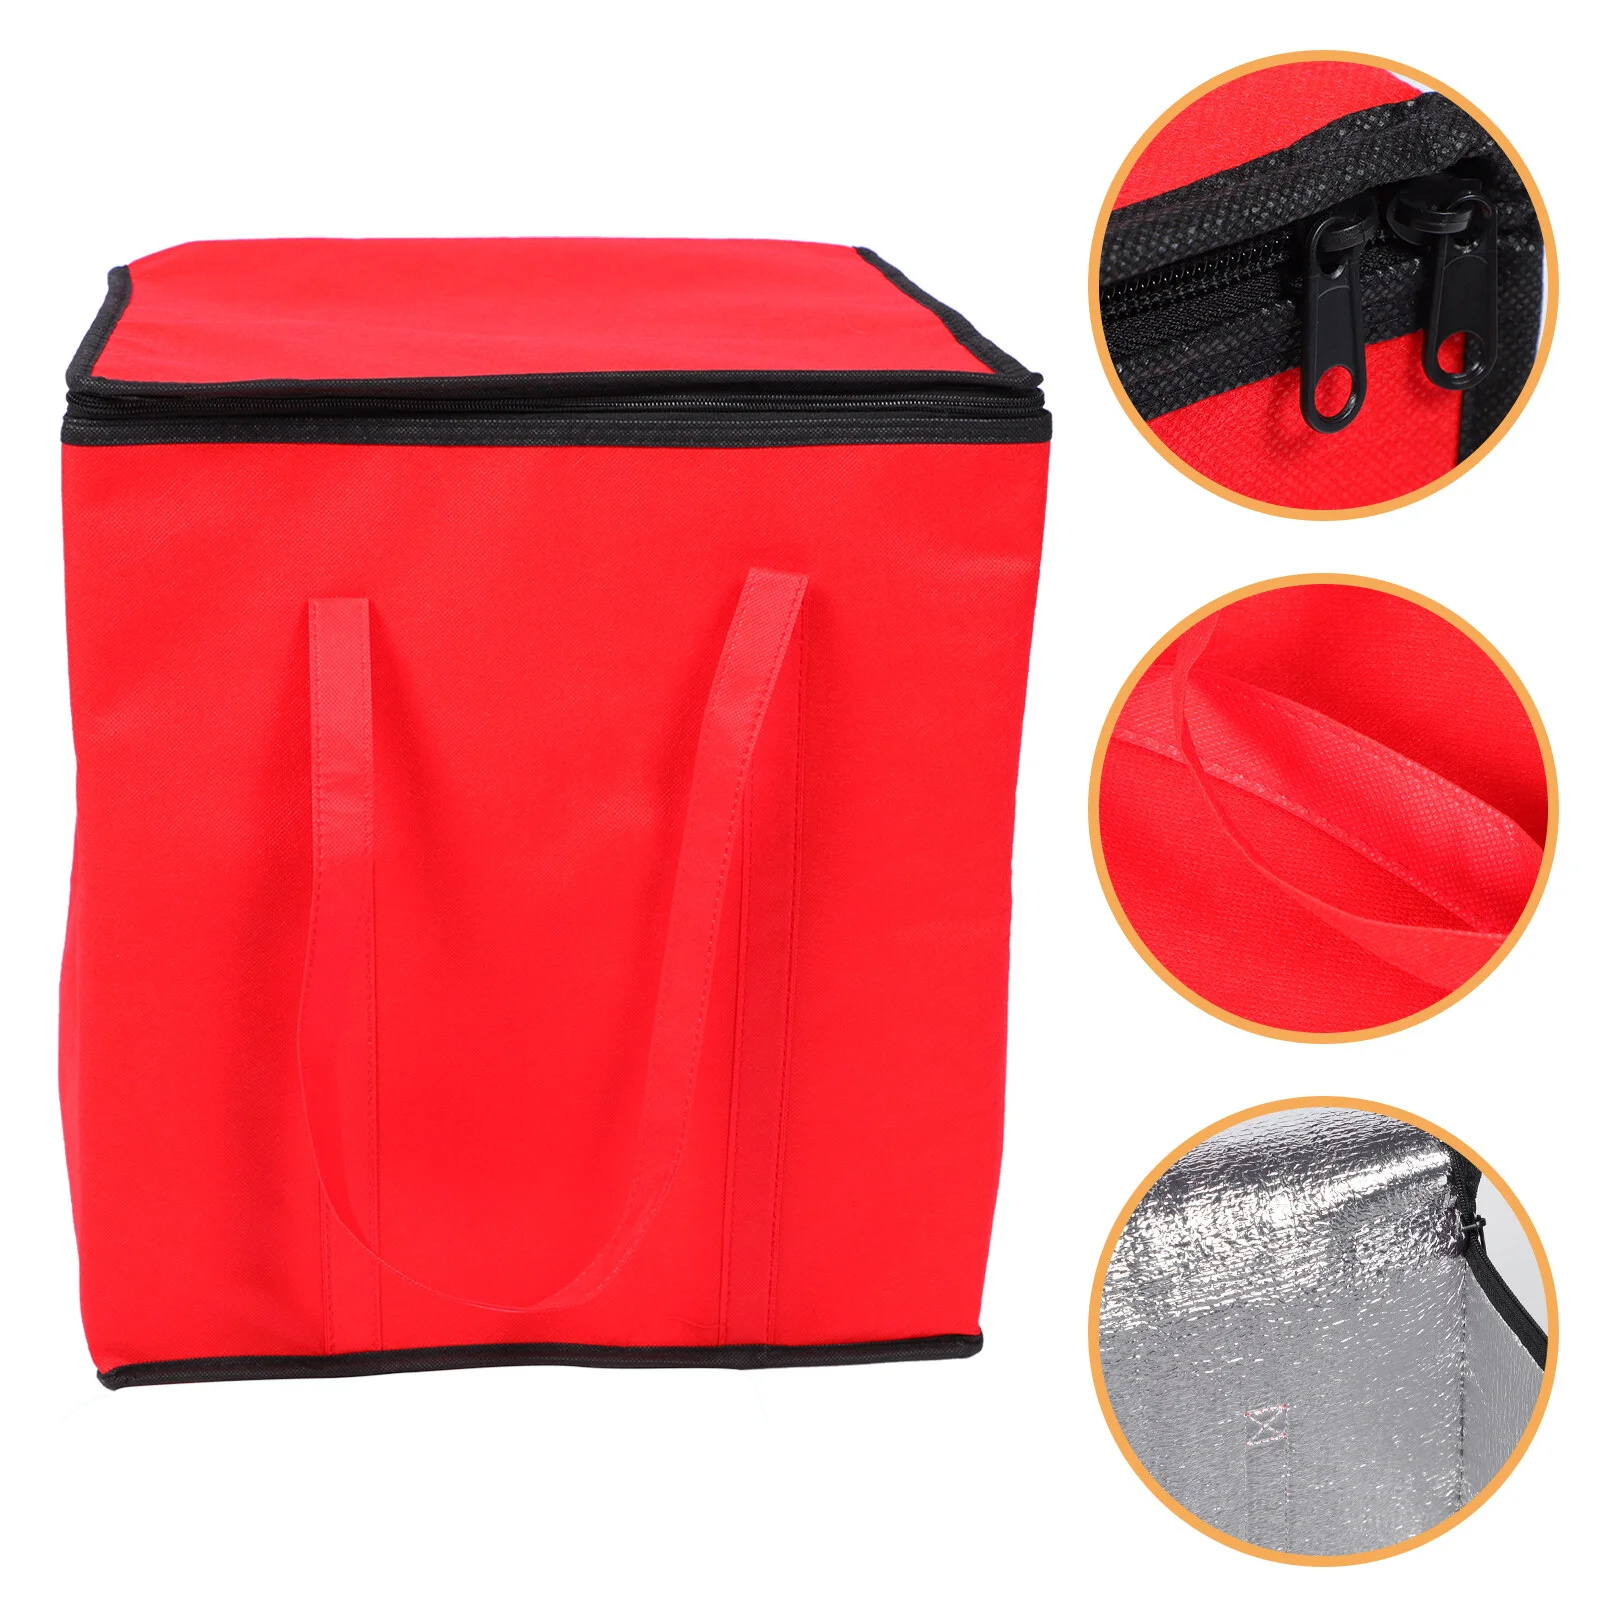 

Foldable Grocery Bags Delivery Bag Portable Cake Storage Food Cooler Insulated Meal Transport Large Storage Insulation Bento